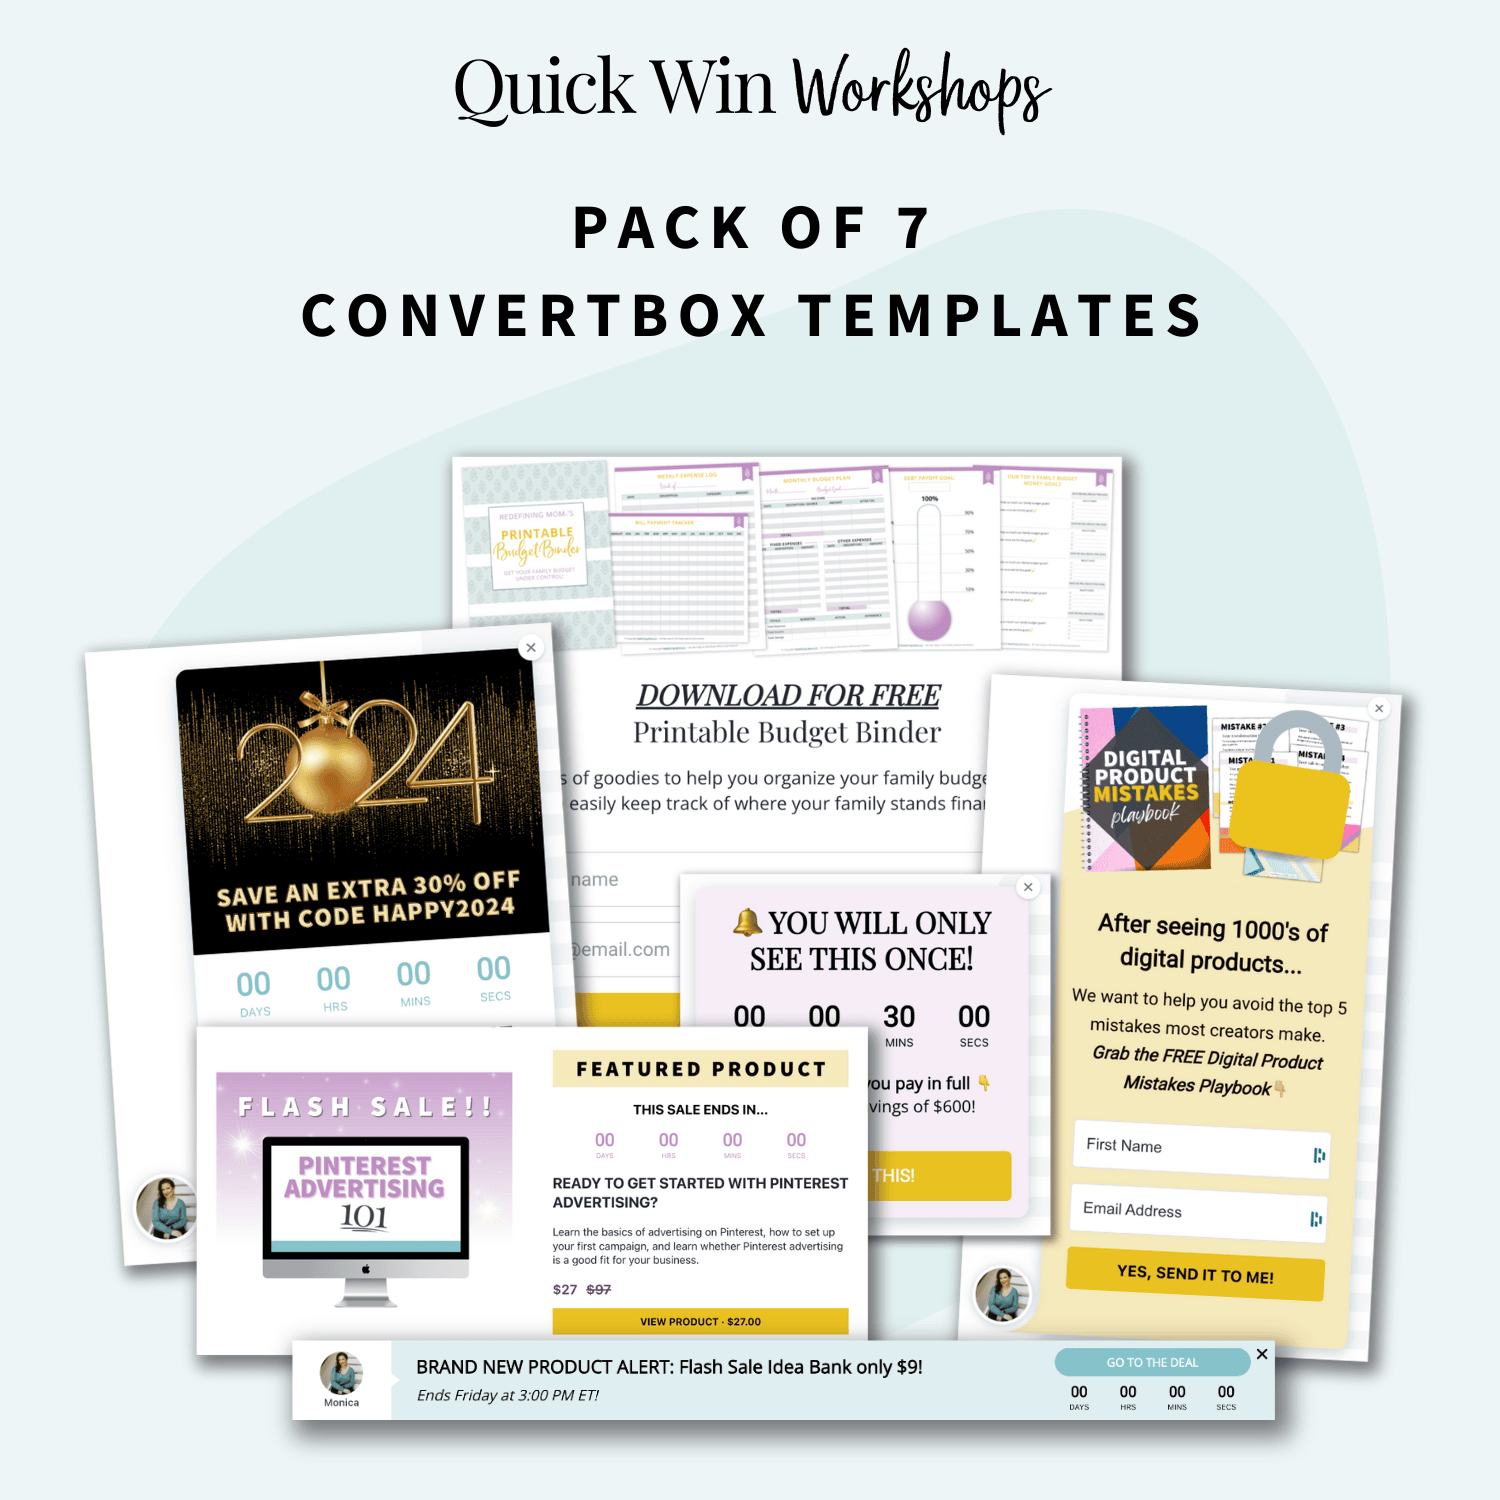 Learn how to strategically use pop-ups on your website with ConvertBox - Templates included